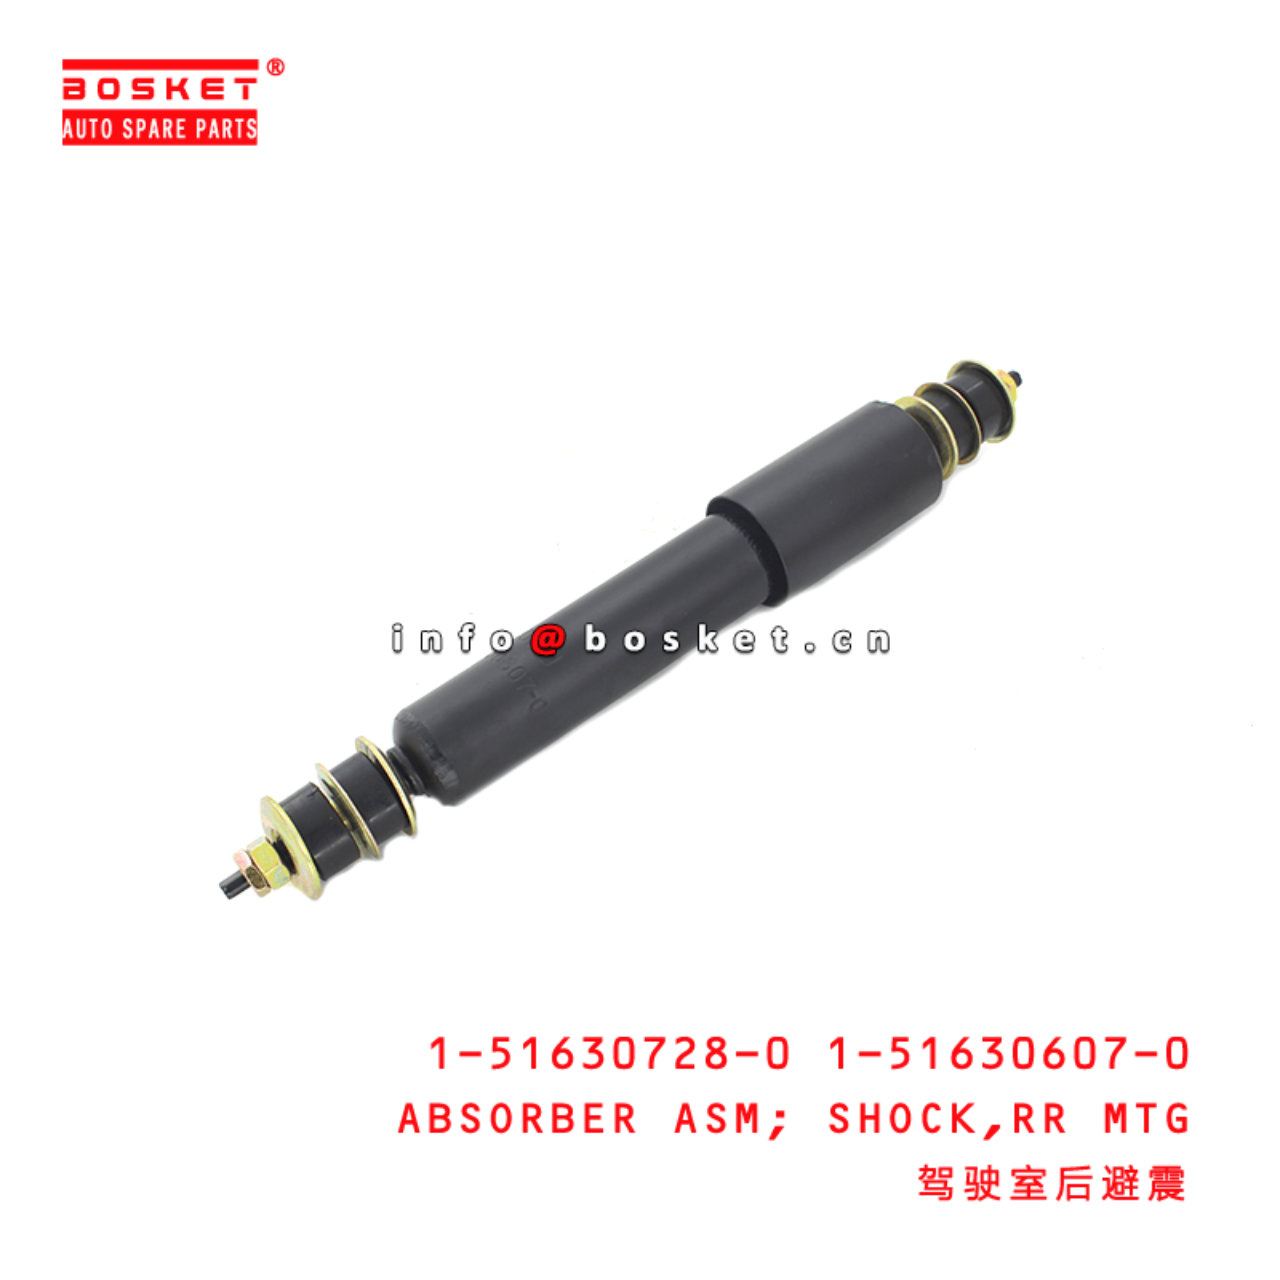 1-51630728-0 1-51630607-0 Rear Mounting Shock Absorber Assembly 1516307280 1516306070 Suitable for I